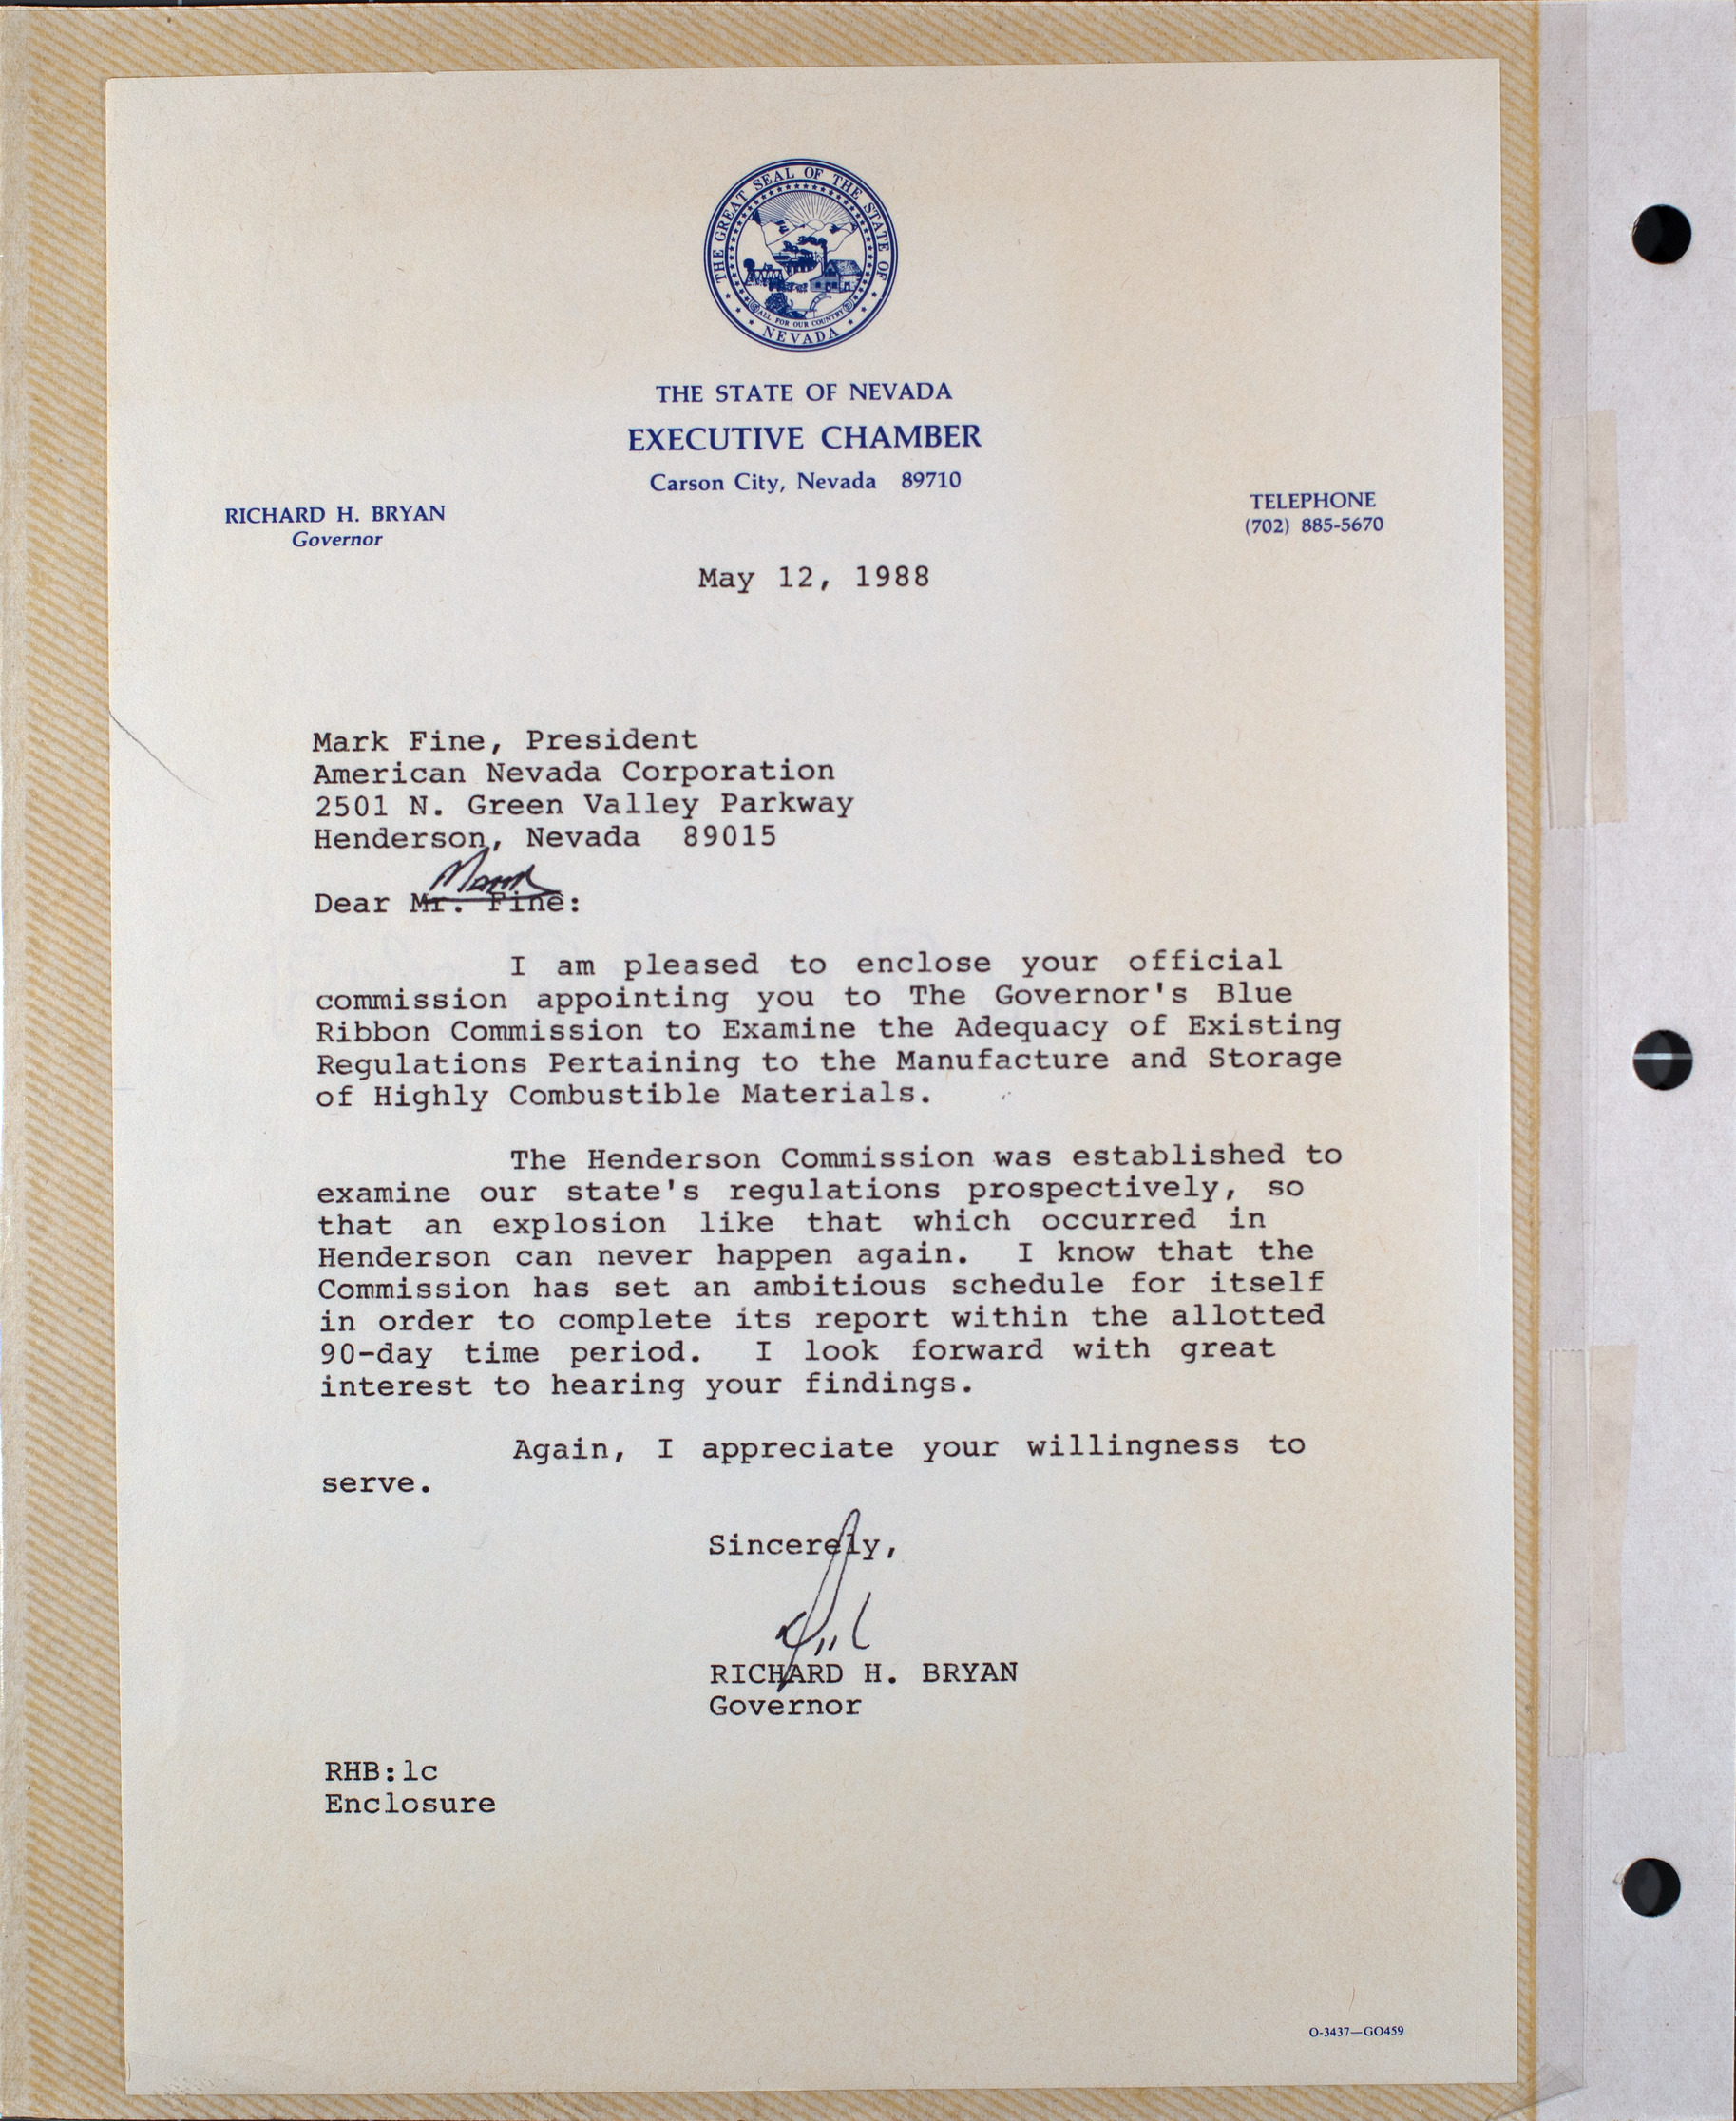 Letter from Richard Bryan to Mark Fine, May 12, 1988